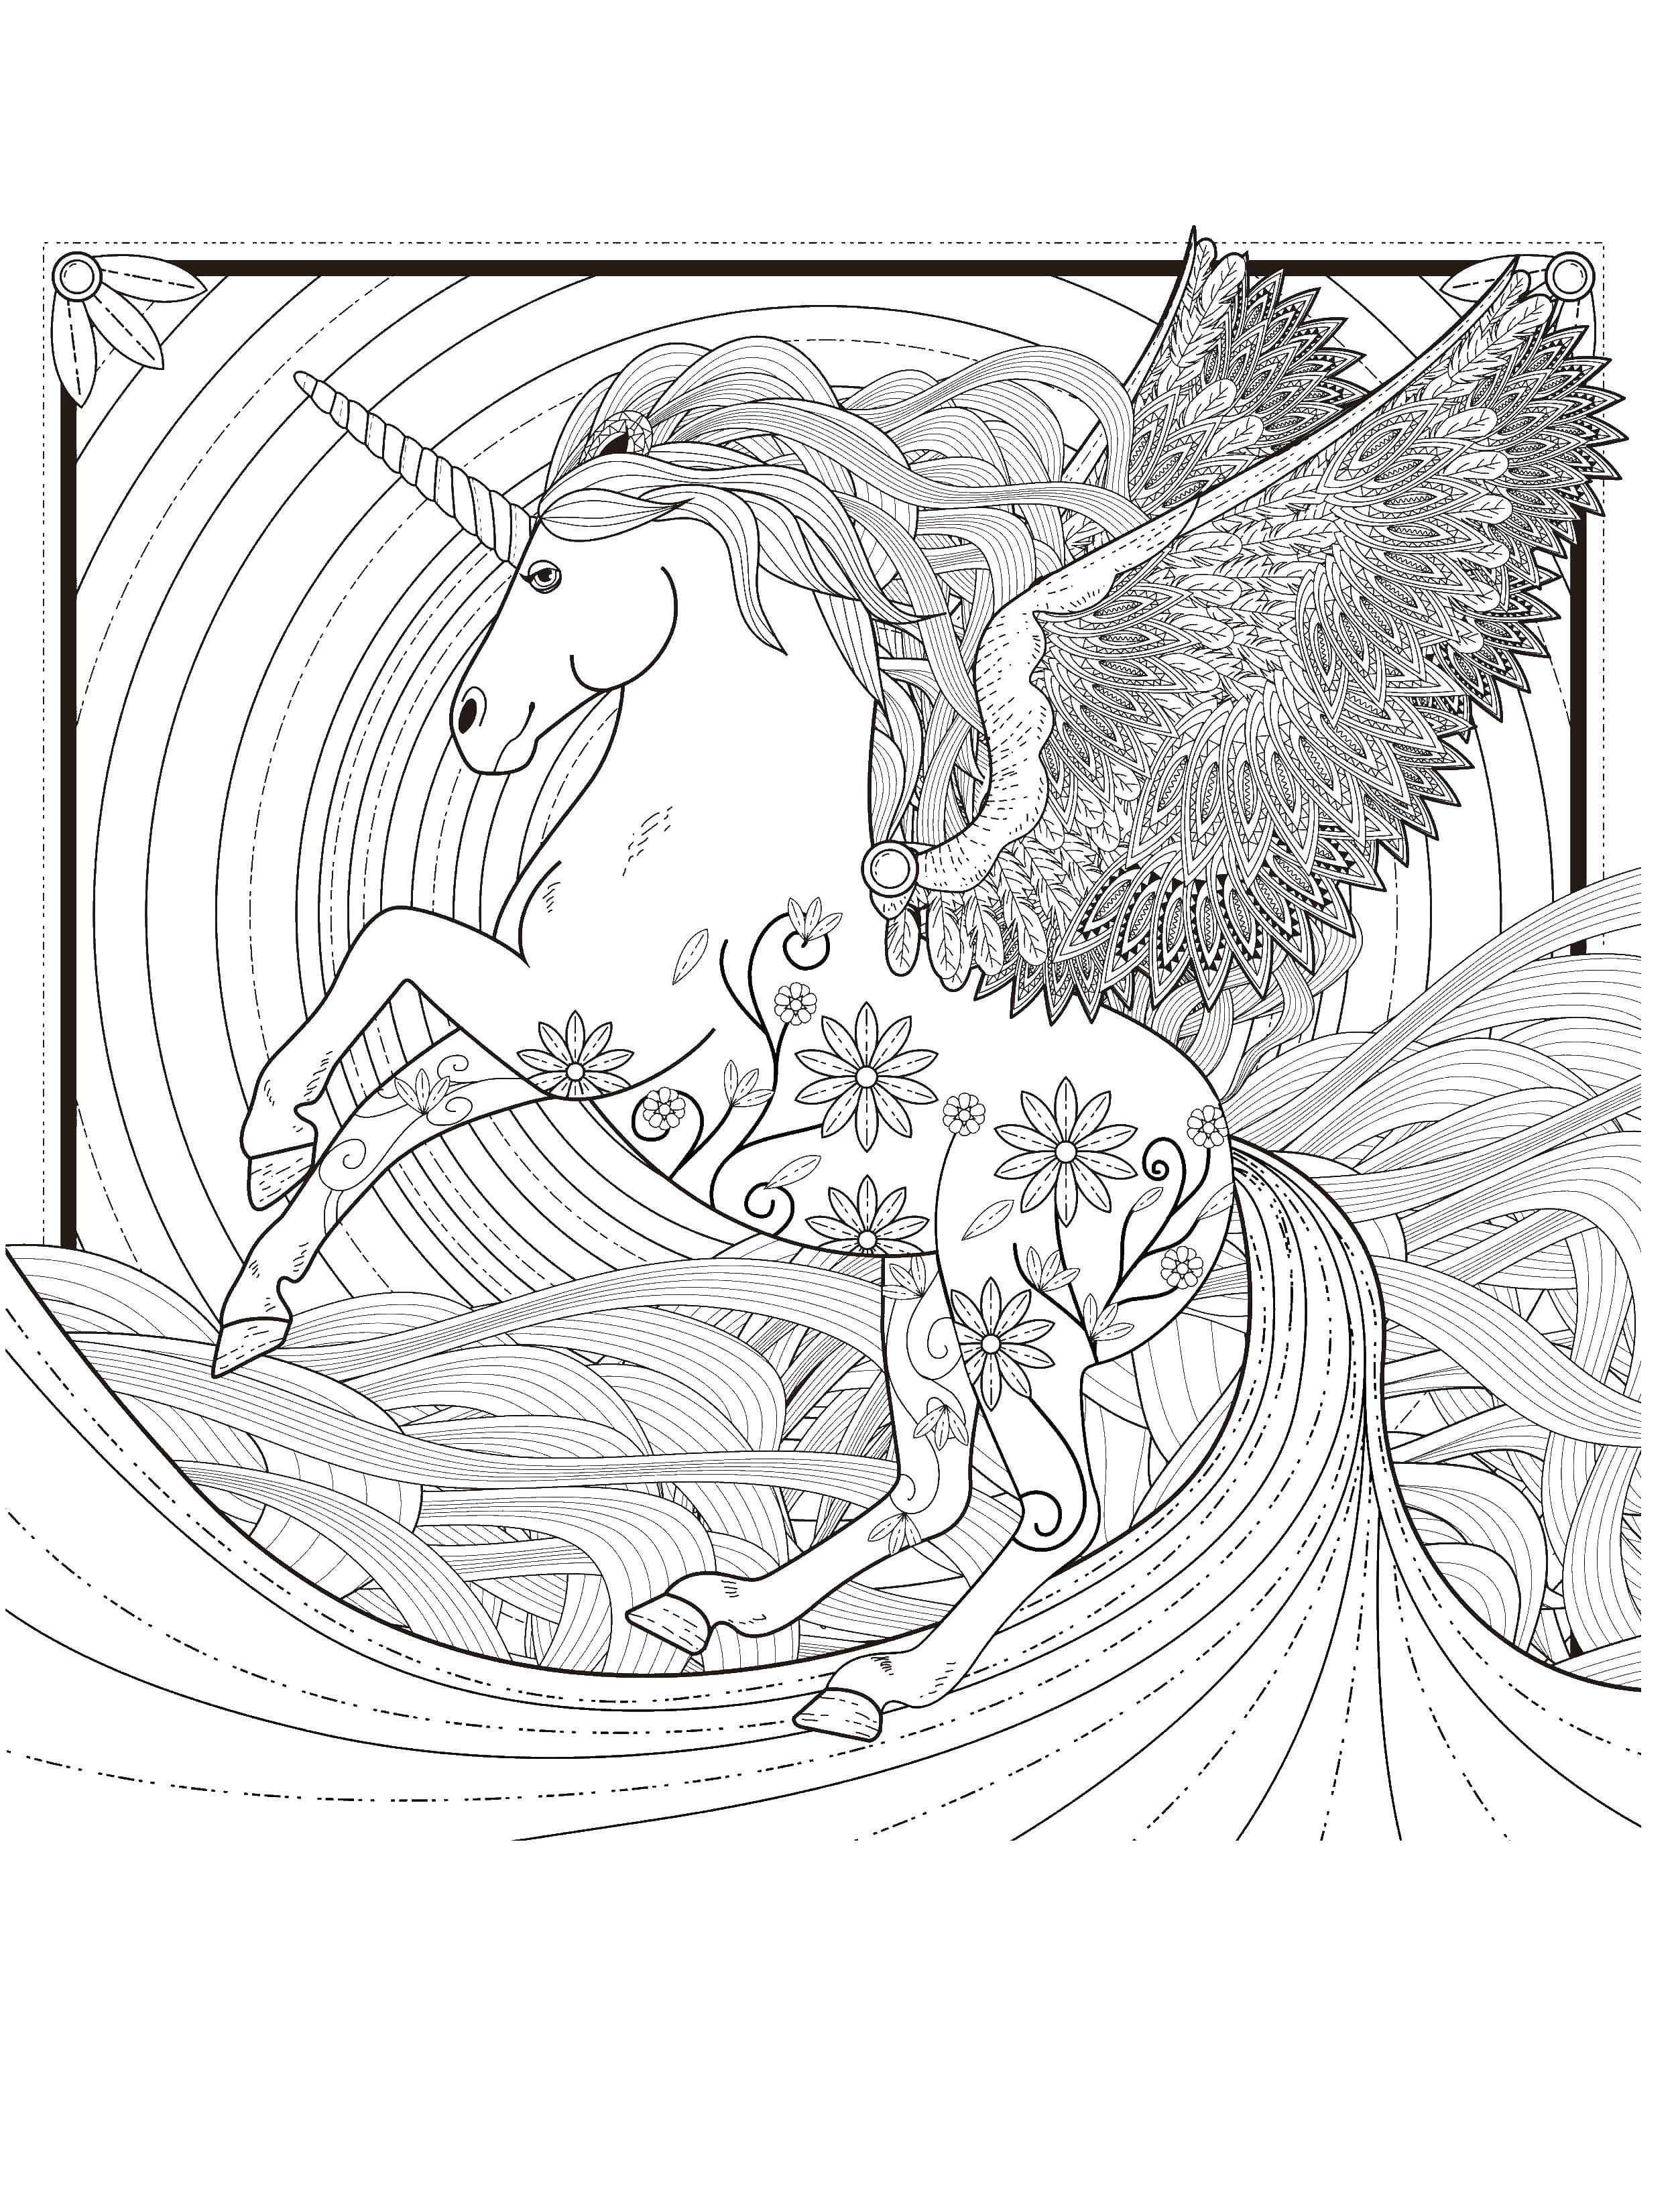 Coloring Winged unicorn. Category Ponies. Tags:  pony tale, girls, unicorn.